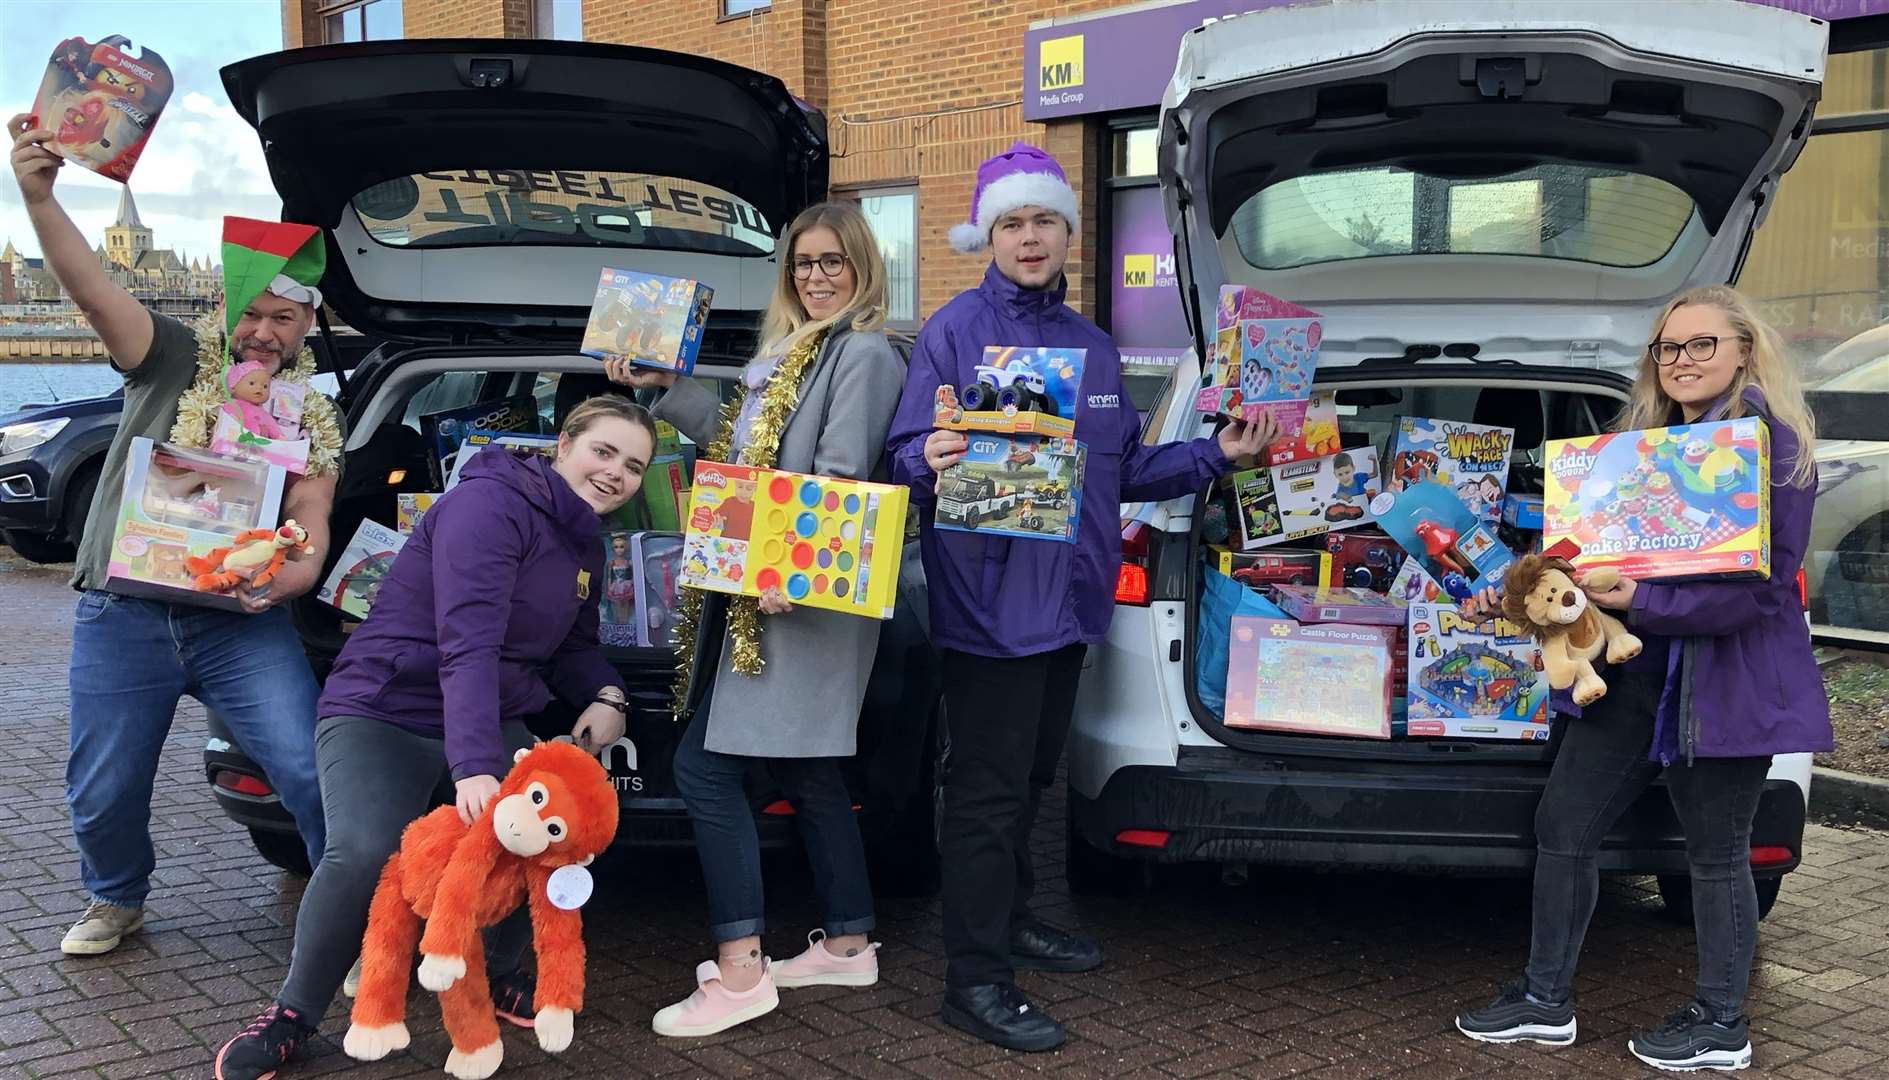 kmfm Street Teams along with breakfast show presenters Garry and Laura prepare to distribute the toys